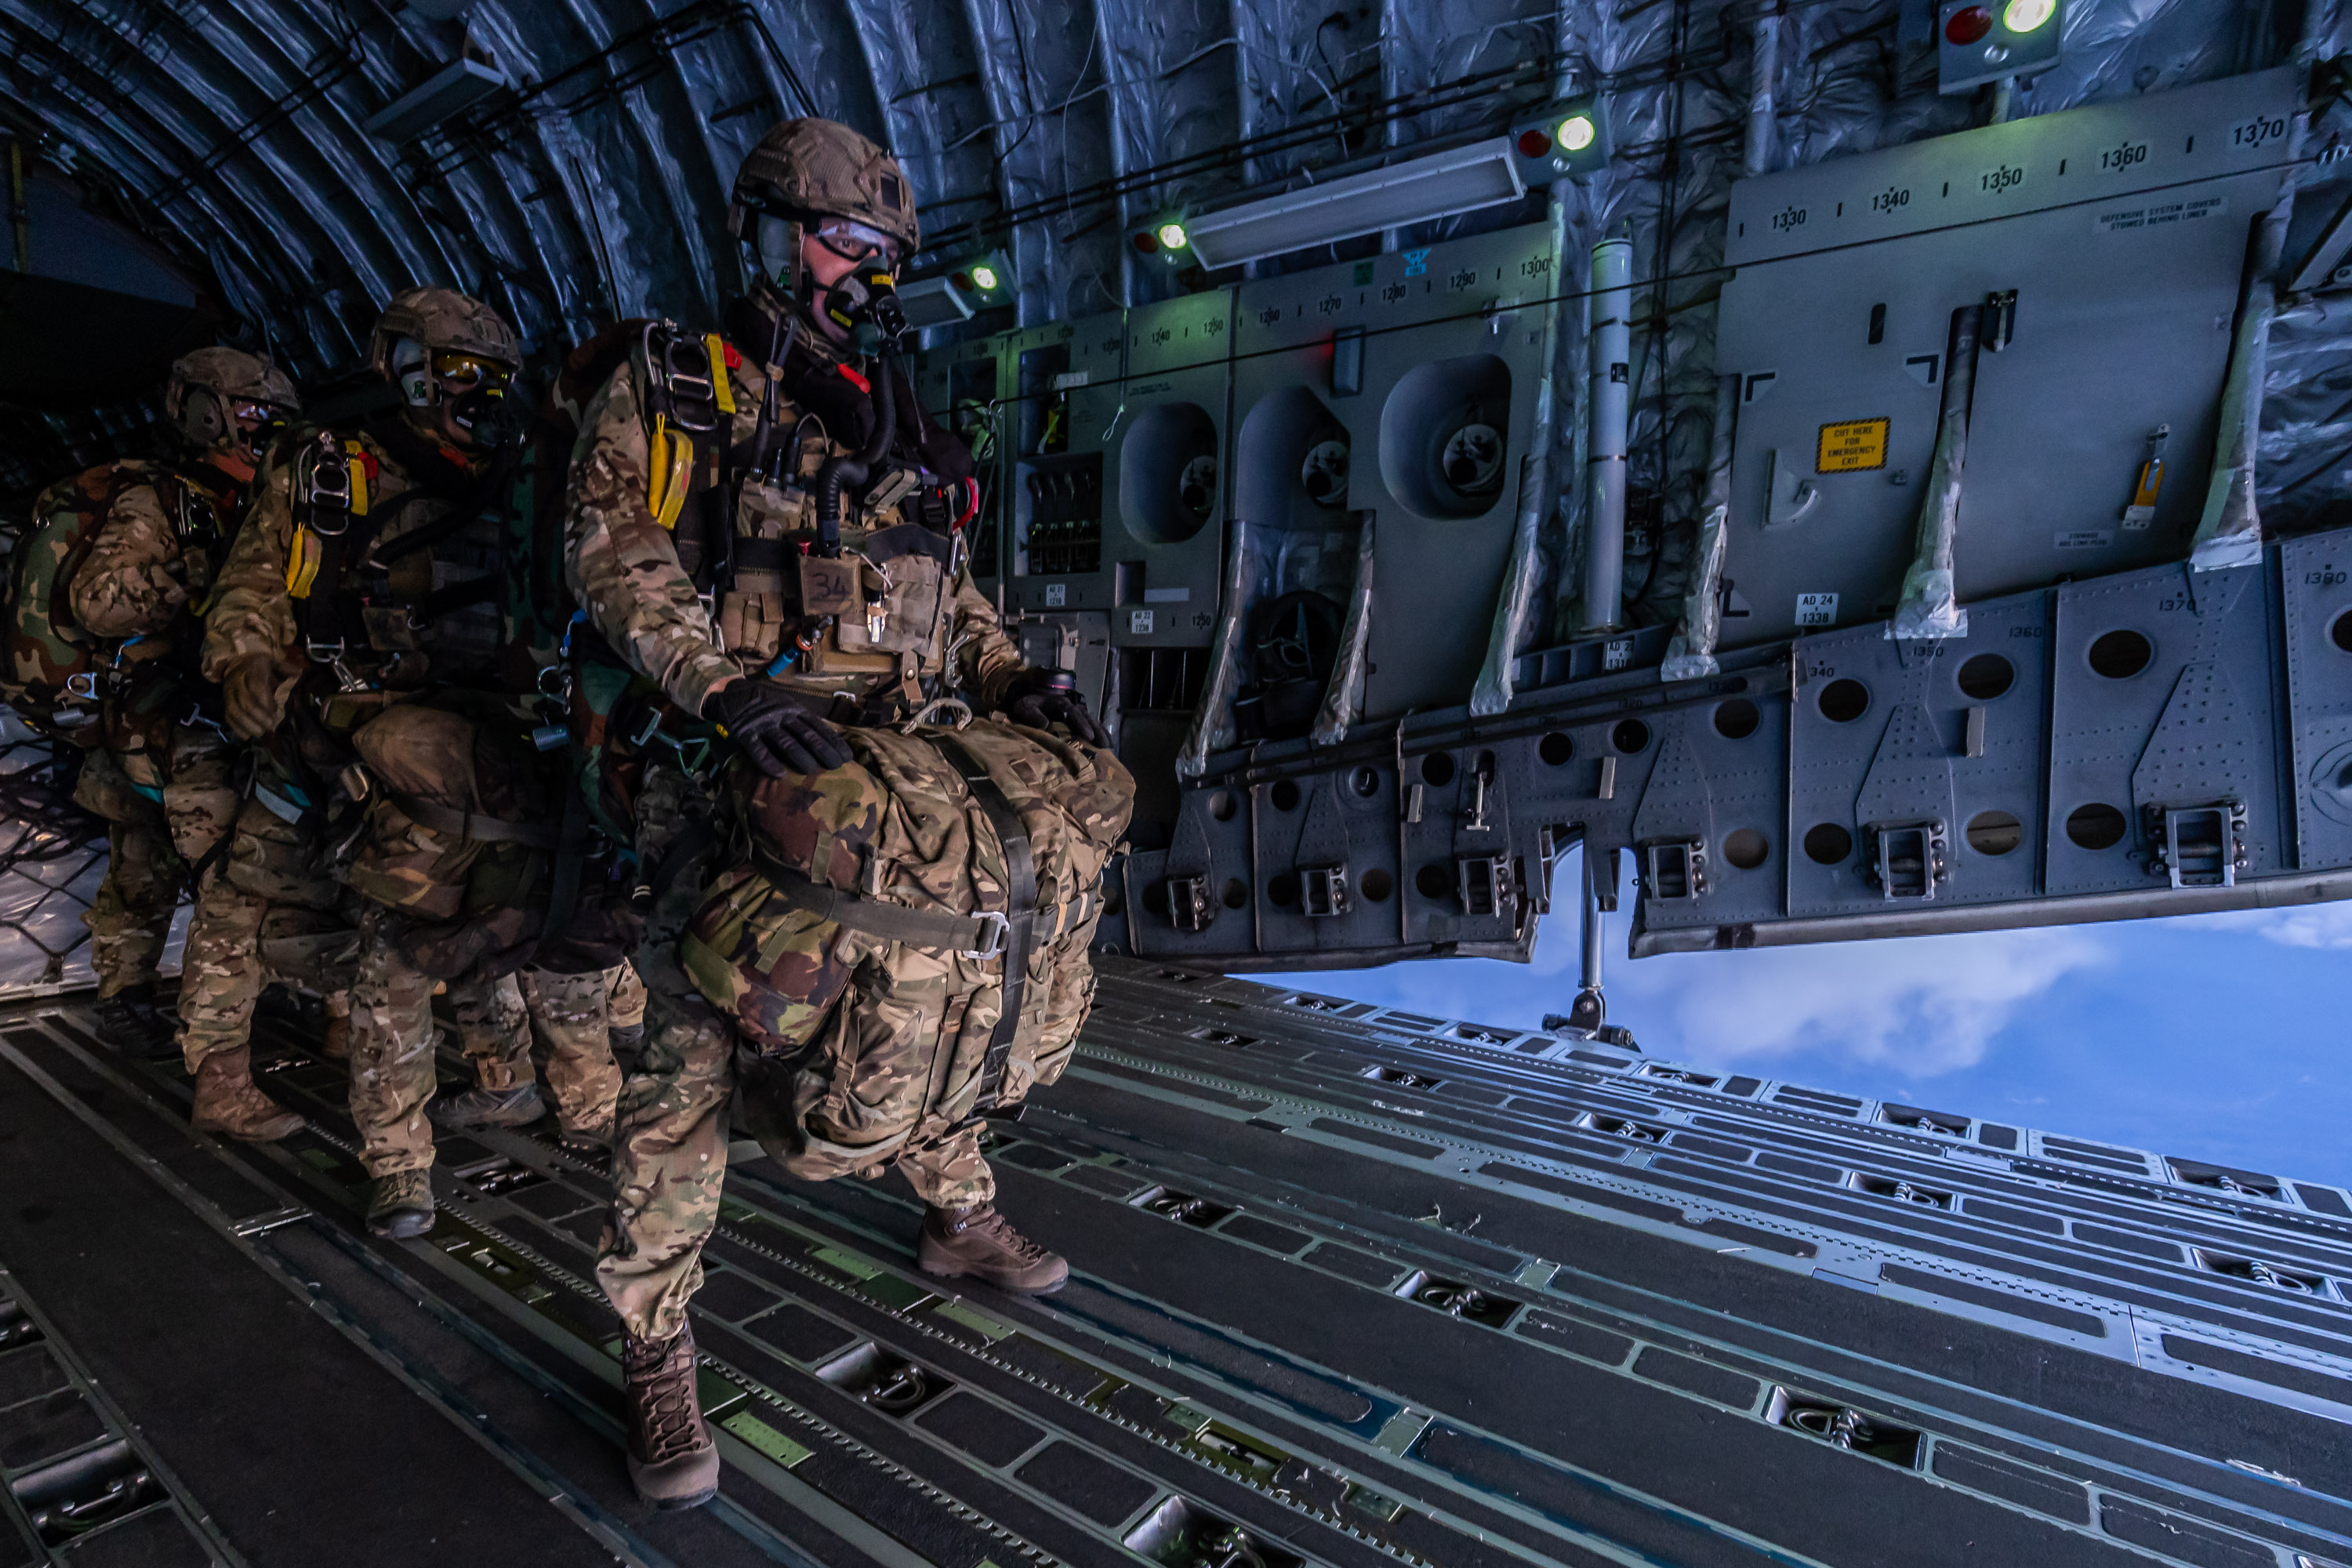 Pathfinders prepare to jump from the carrier of Globemaster.